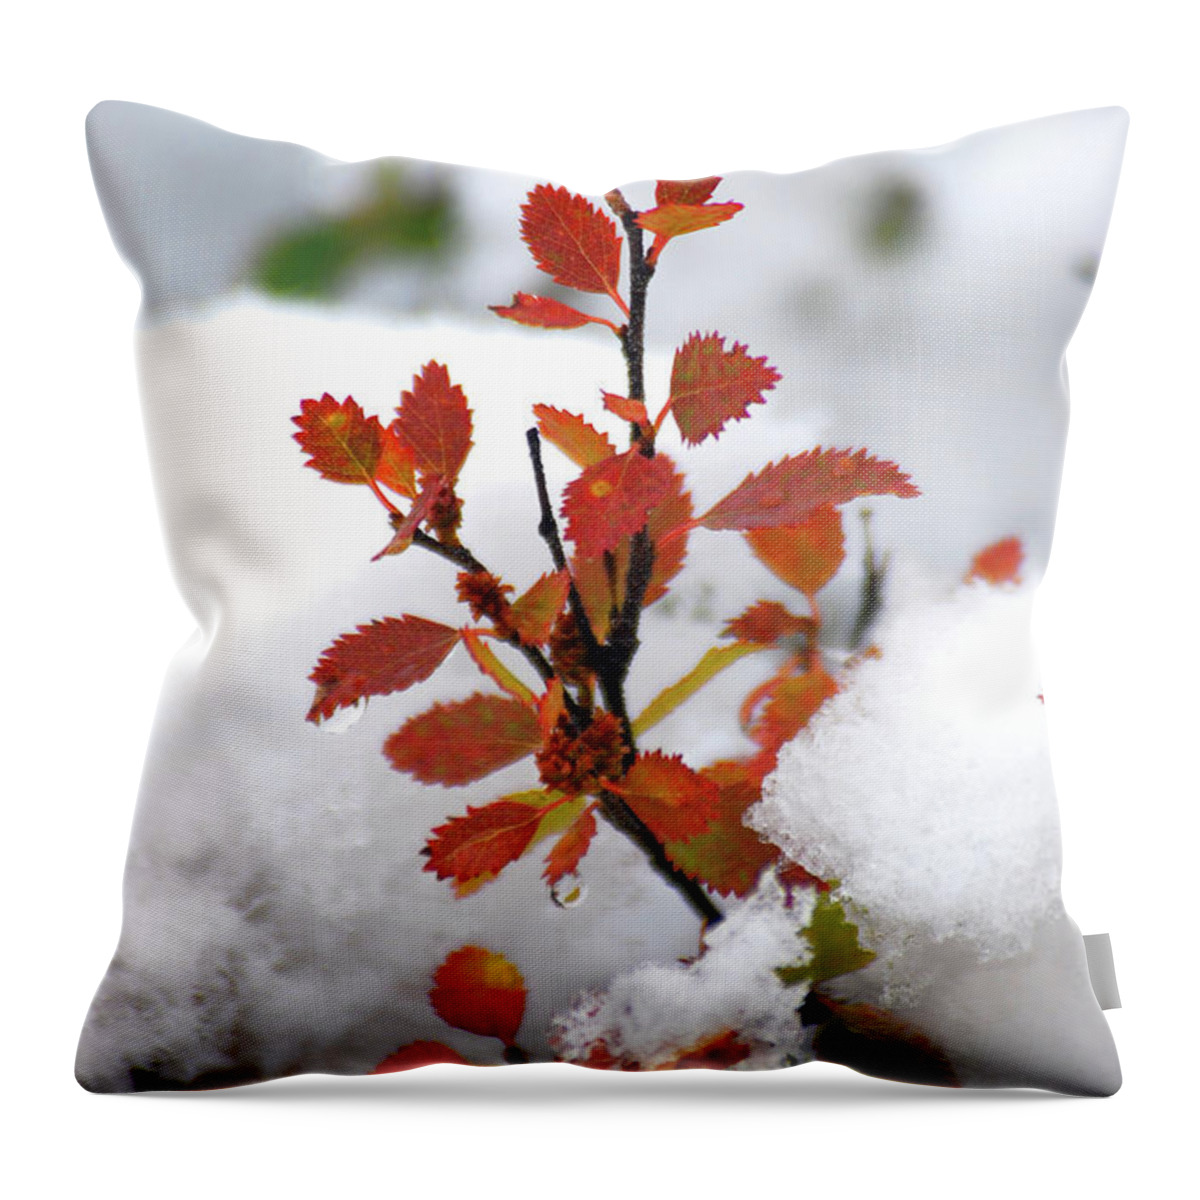 Autumn Visited Winter Throw Pillow featuring the photograph Autumn visited winter #2 by Elbegzaya Lkhagvasuren